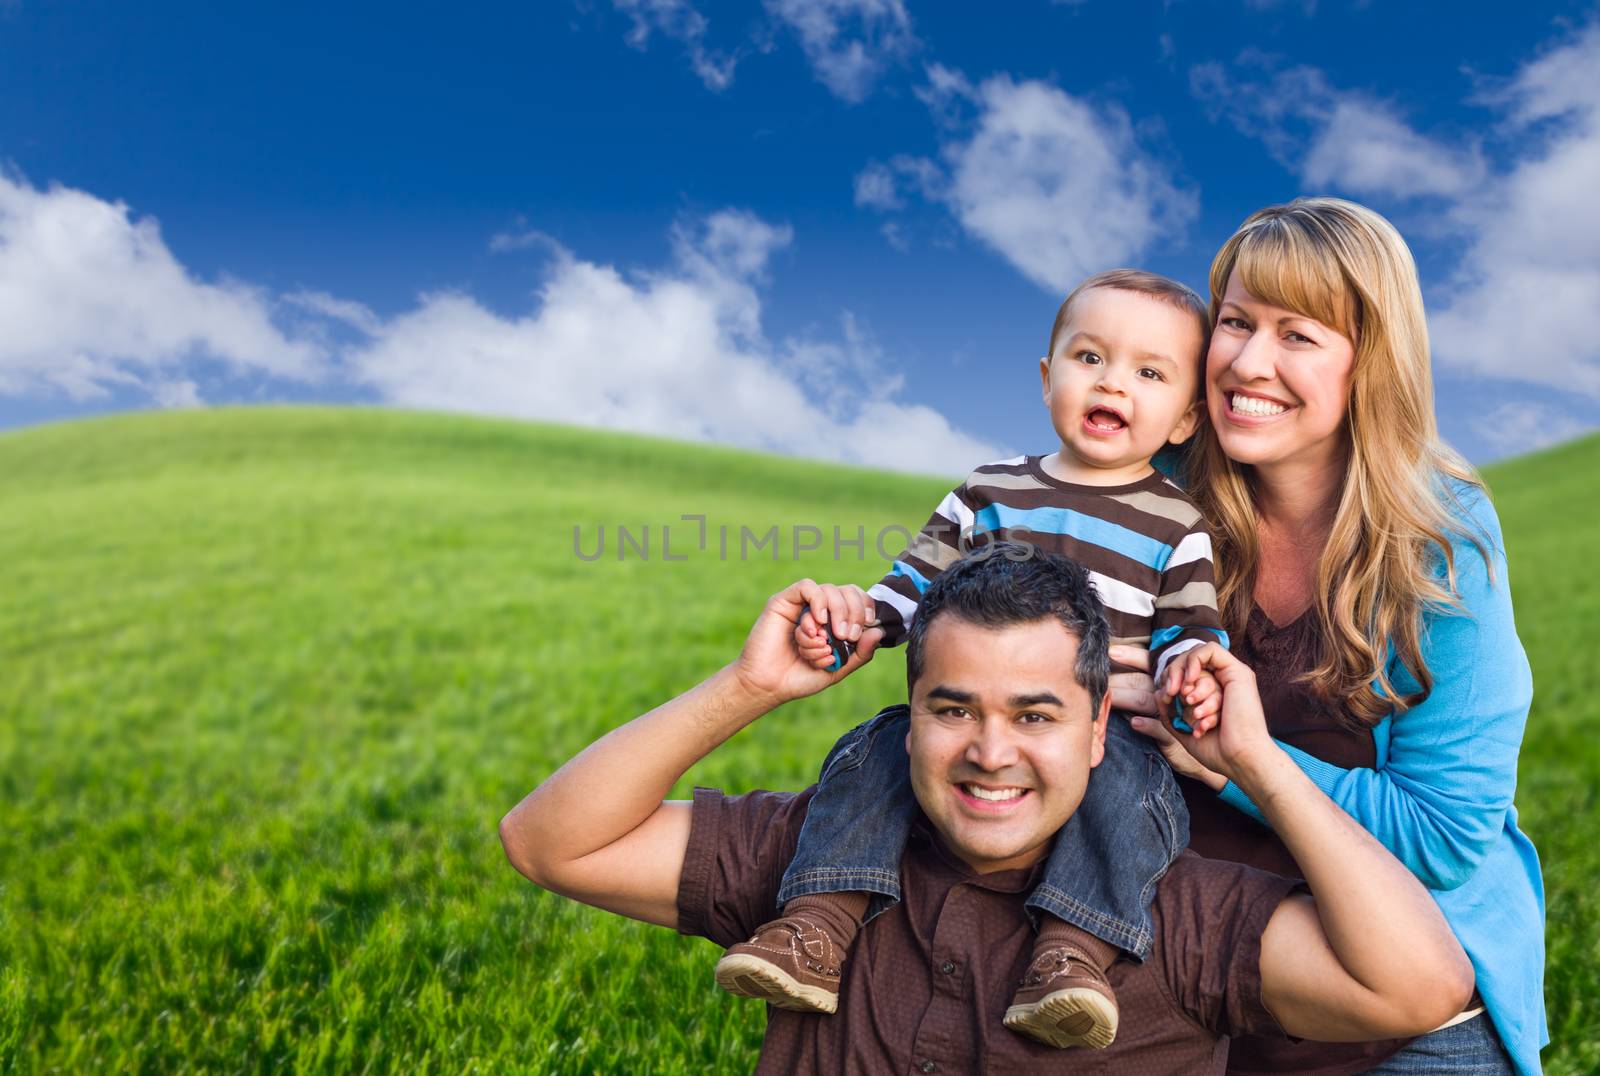 Mixed Race Family In Green Grass Field by Feverpitched